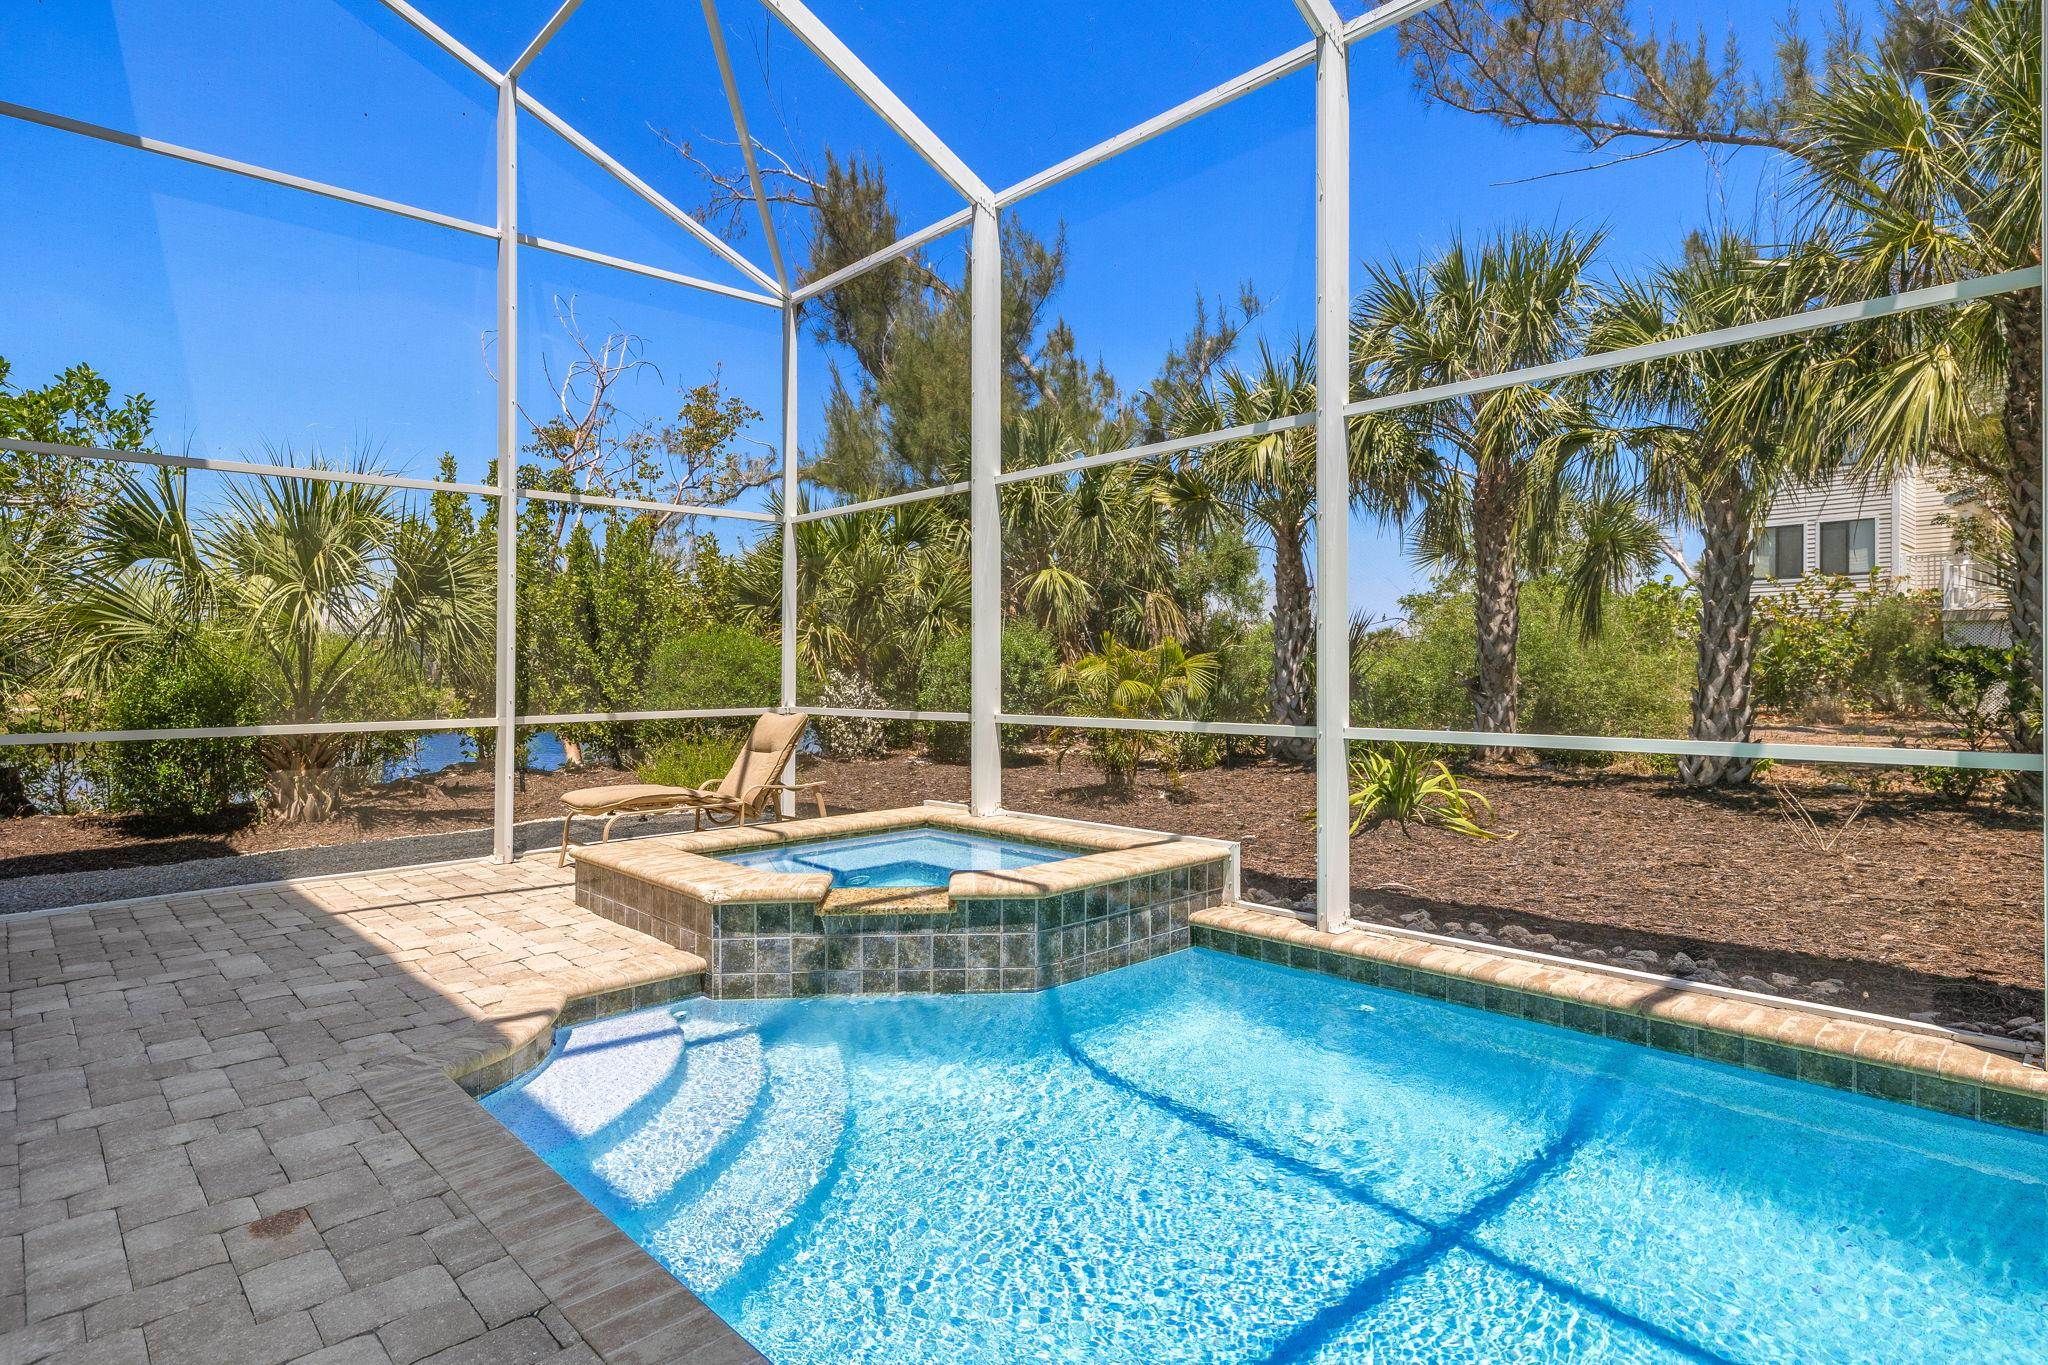 1402 Middle Gulf Dr, Sanibel, Florida 33957, 3 Bedrooms Bedrooms, ,3 BathroomsBathrooms,Residential,For Sale,Middle Gulf Dr,2240375